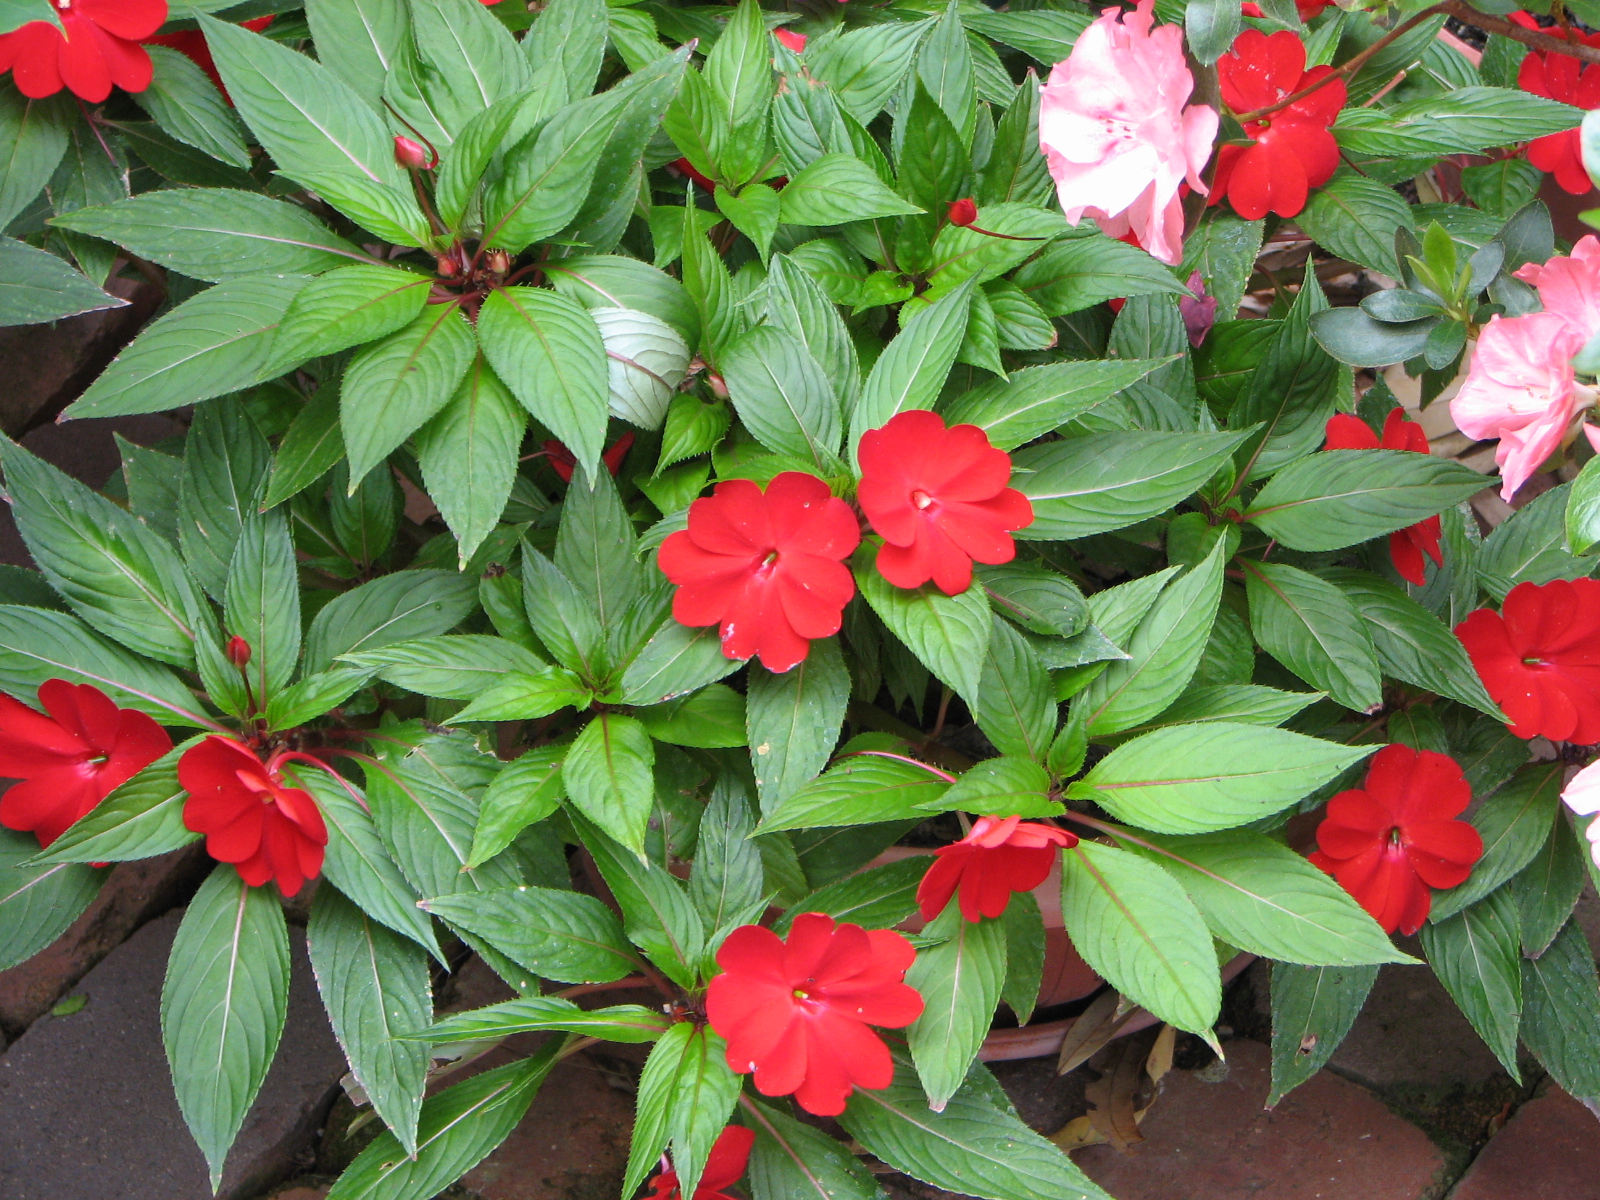 Gallery of pictures of impatiens flowers.